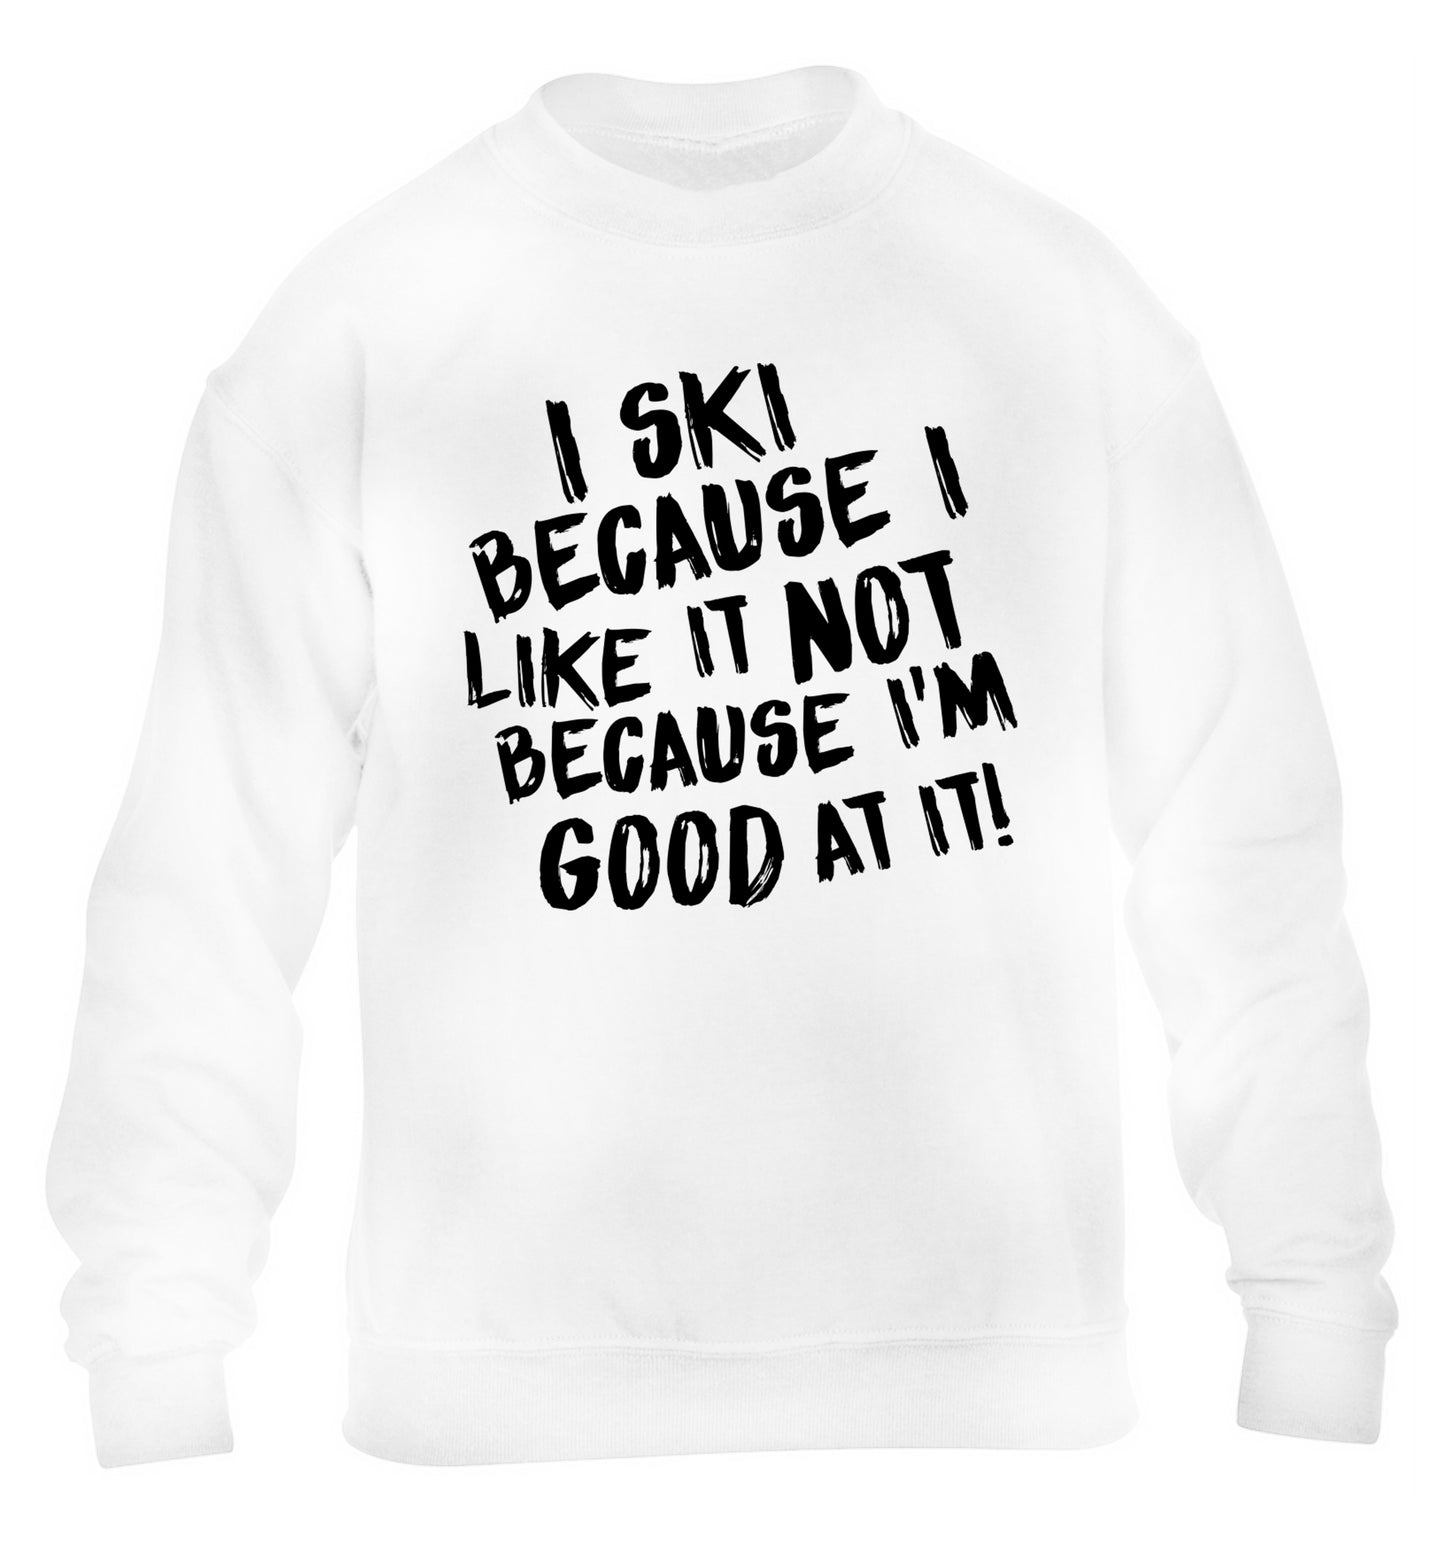 I ski because I like it not because I'm good at it children's white sweater 12-14 Years